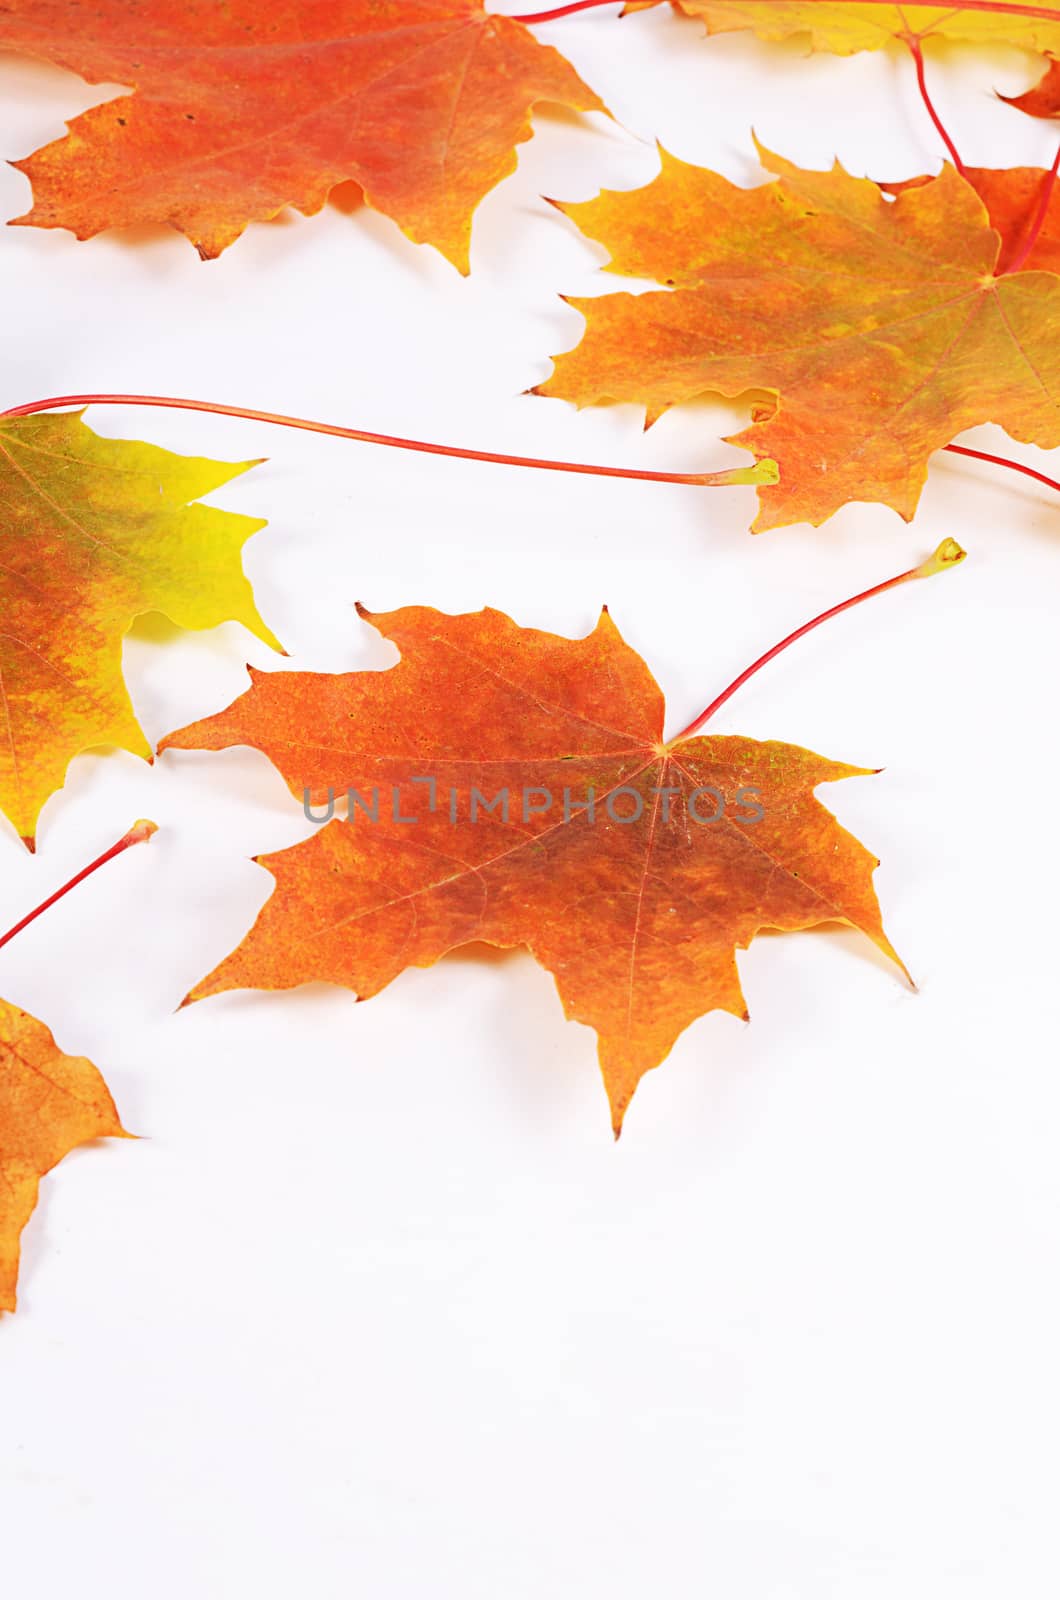 The autumn maple leaves as a  background